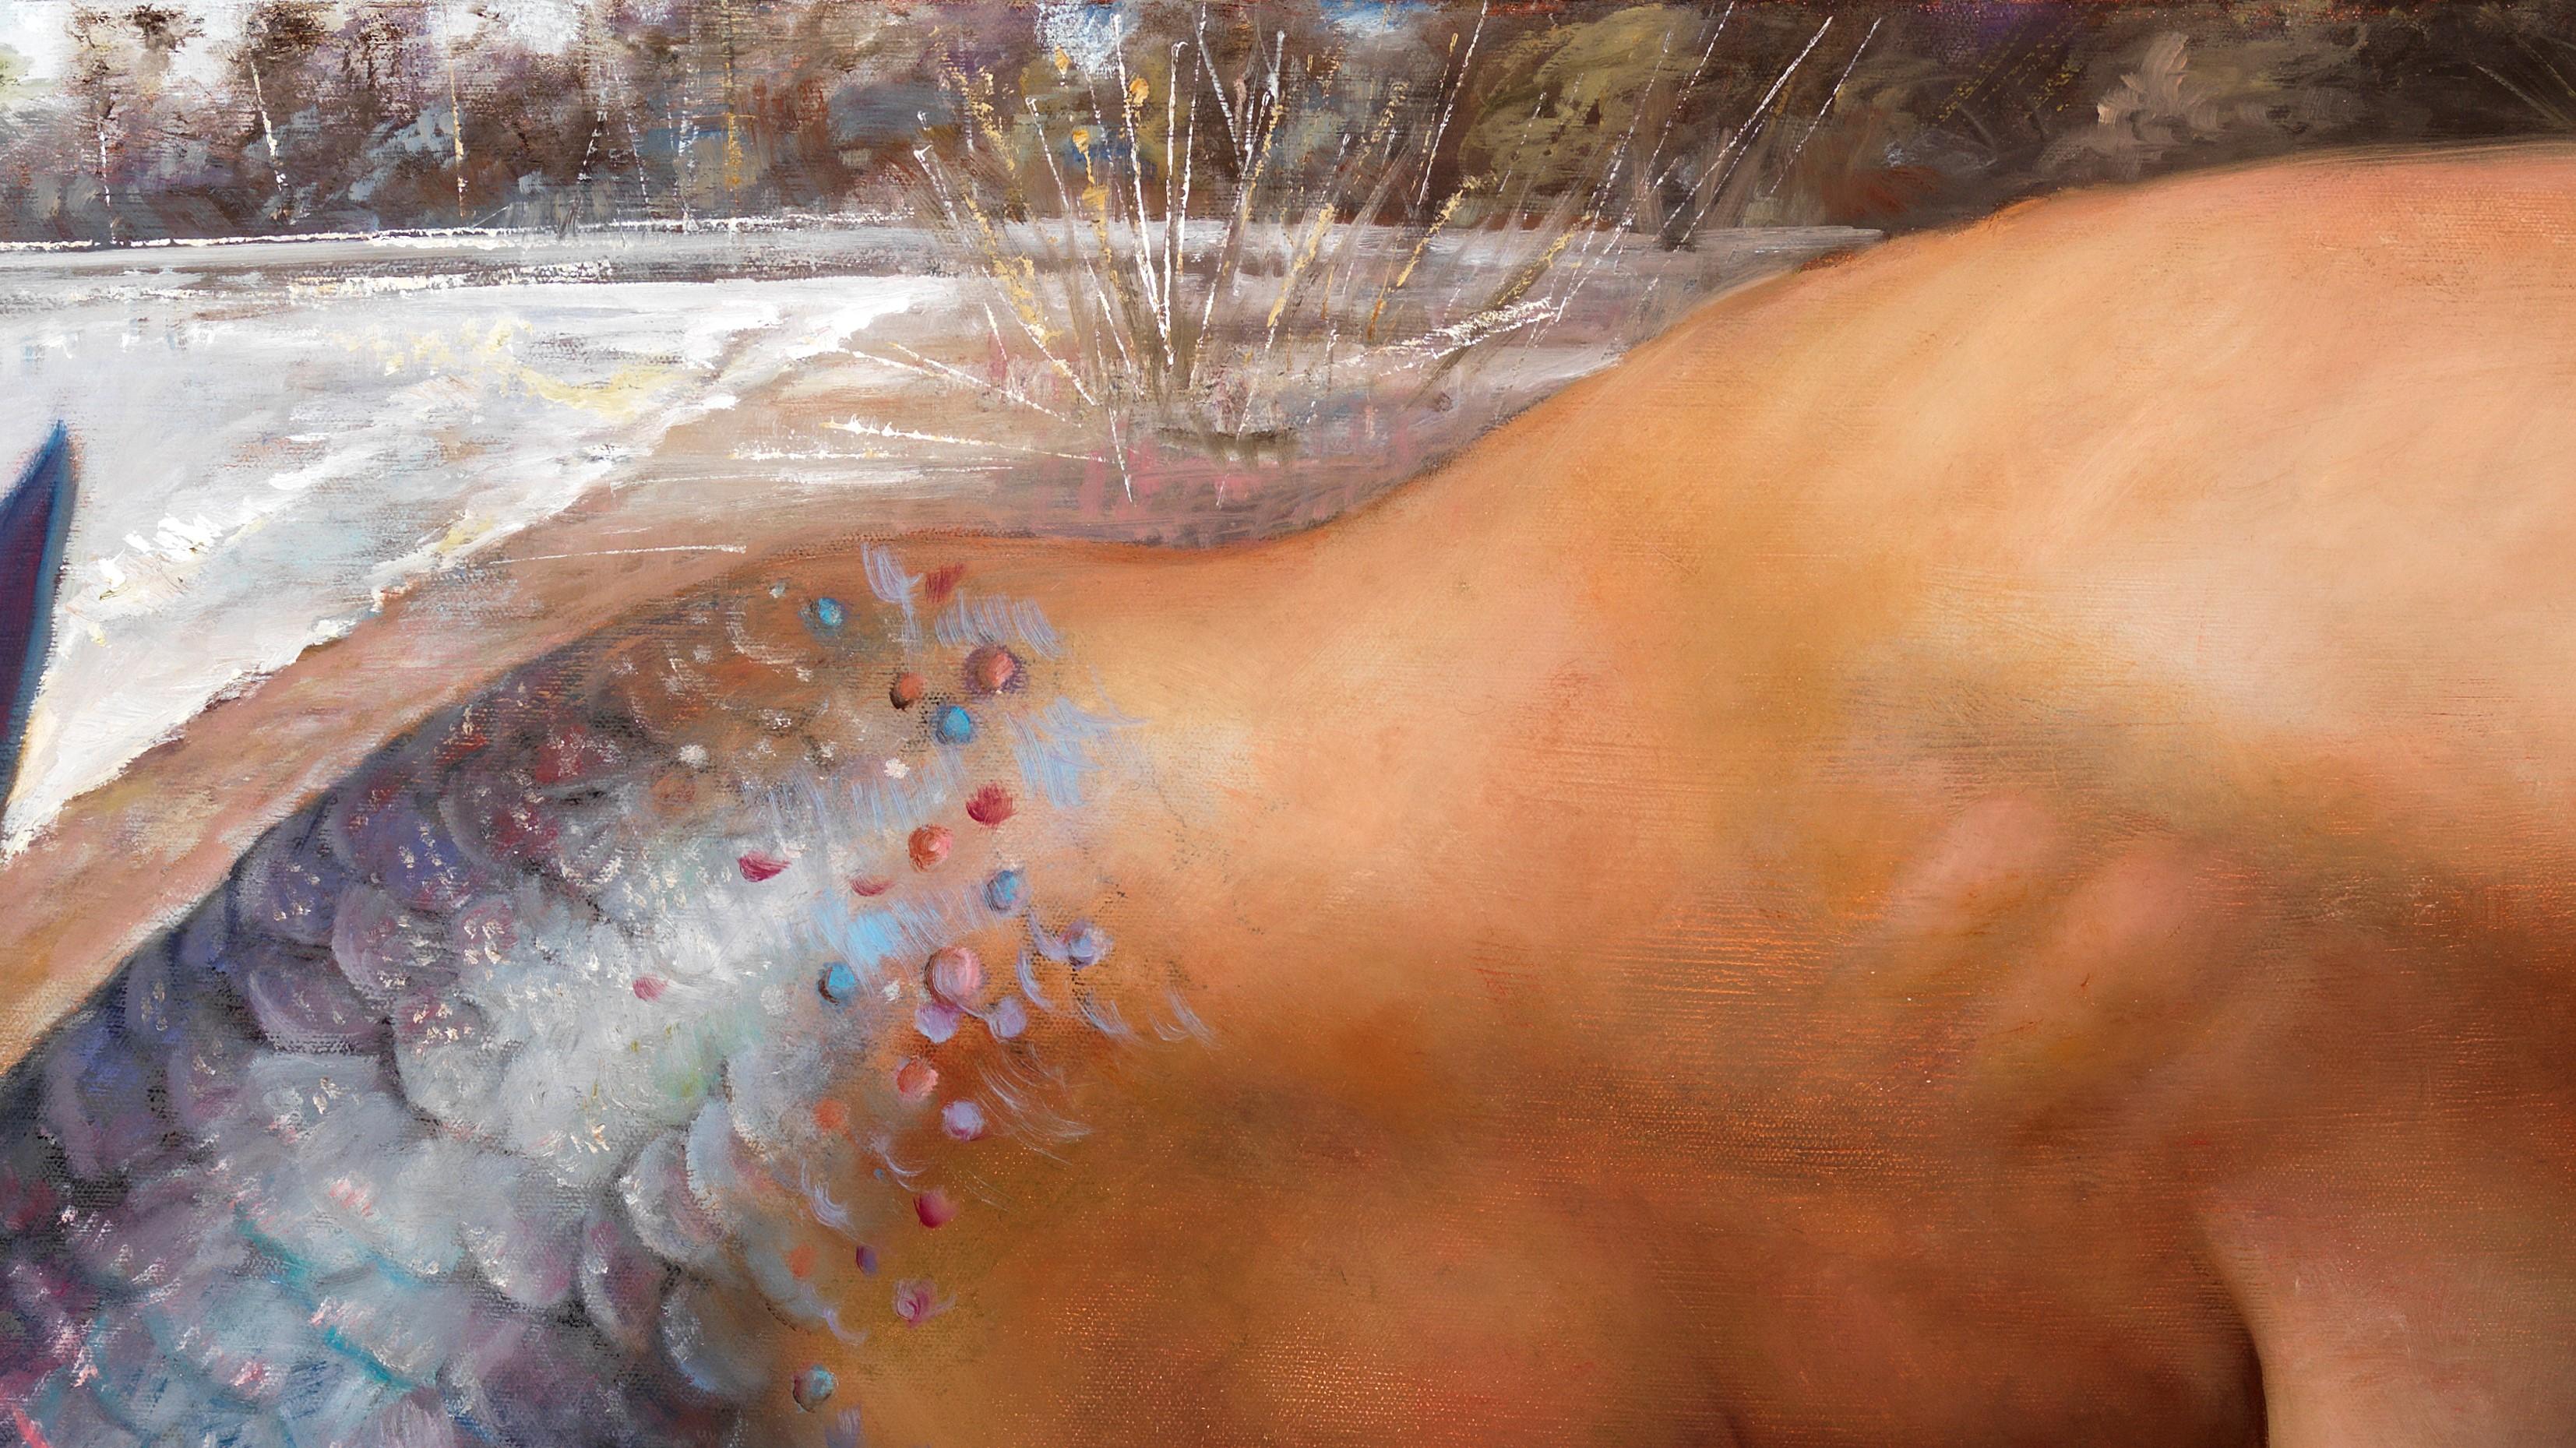 Submerged Mermaid - Dark Haired, Fair Skinned Mermaid Emerging From the Water - Contemporary Painting by Bruno Surdo